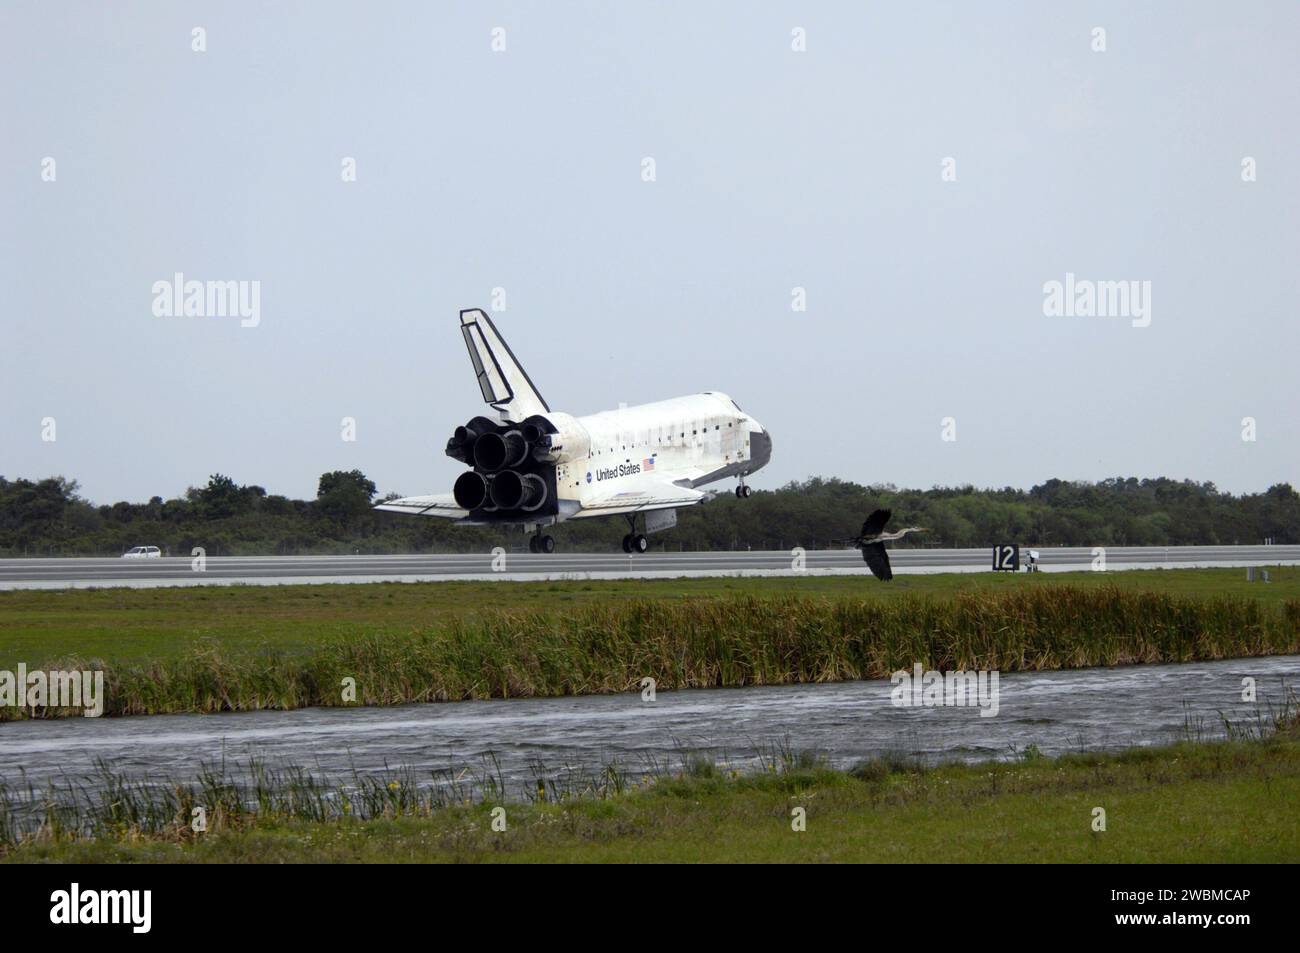 STS119-S-046 (28 March 2009) --- Space Shuttle Discovery touches down on Runway 15 of the Shuttle Landing Facility at NASA's Kennedy Space Center, concluding the 13-day, 5.3-million mile journey of the STS-119 mission to the International Space Station. Onboard are NASA astronauts Lee Archambault, commander; Tony Antonelli, pilot; Steve Swanson, Richard Arnold, Joseph Acaba, John Phillips and Sandra Magnus, all mission specialists. The main landing gear touched down at 3:13:17 p.m. (EDT) on March 28, 2009. The nose gear touched down at 3:13:40 p.m. and wheels stop was at 3:14:45 p.m. During th Stock Photo